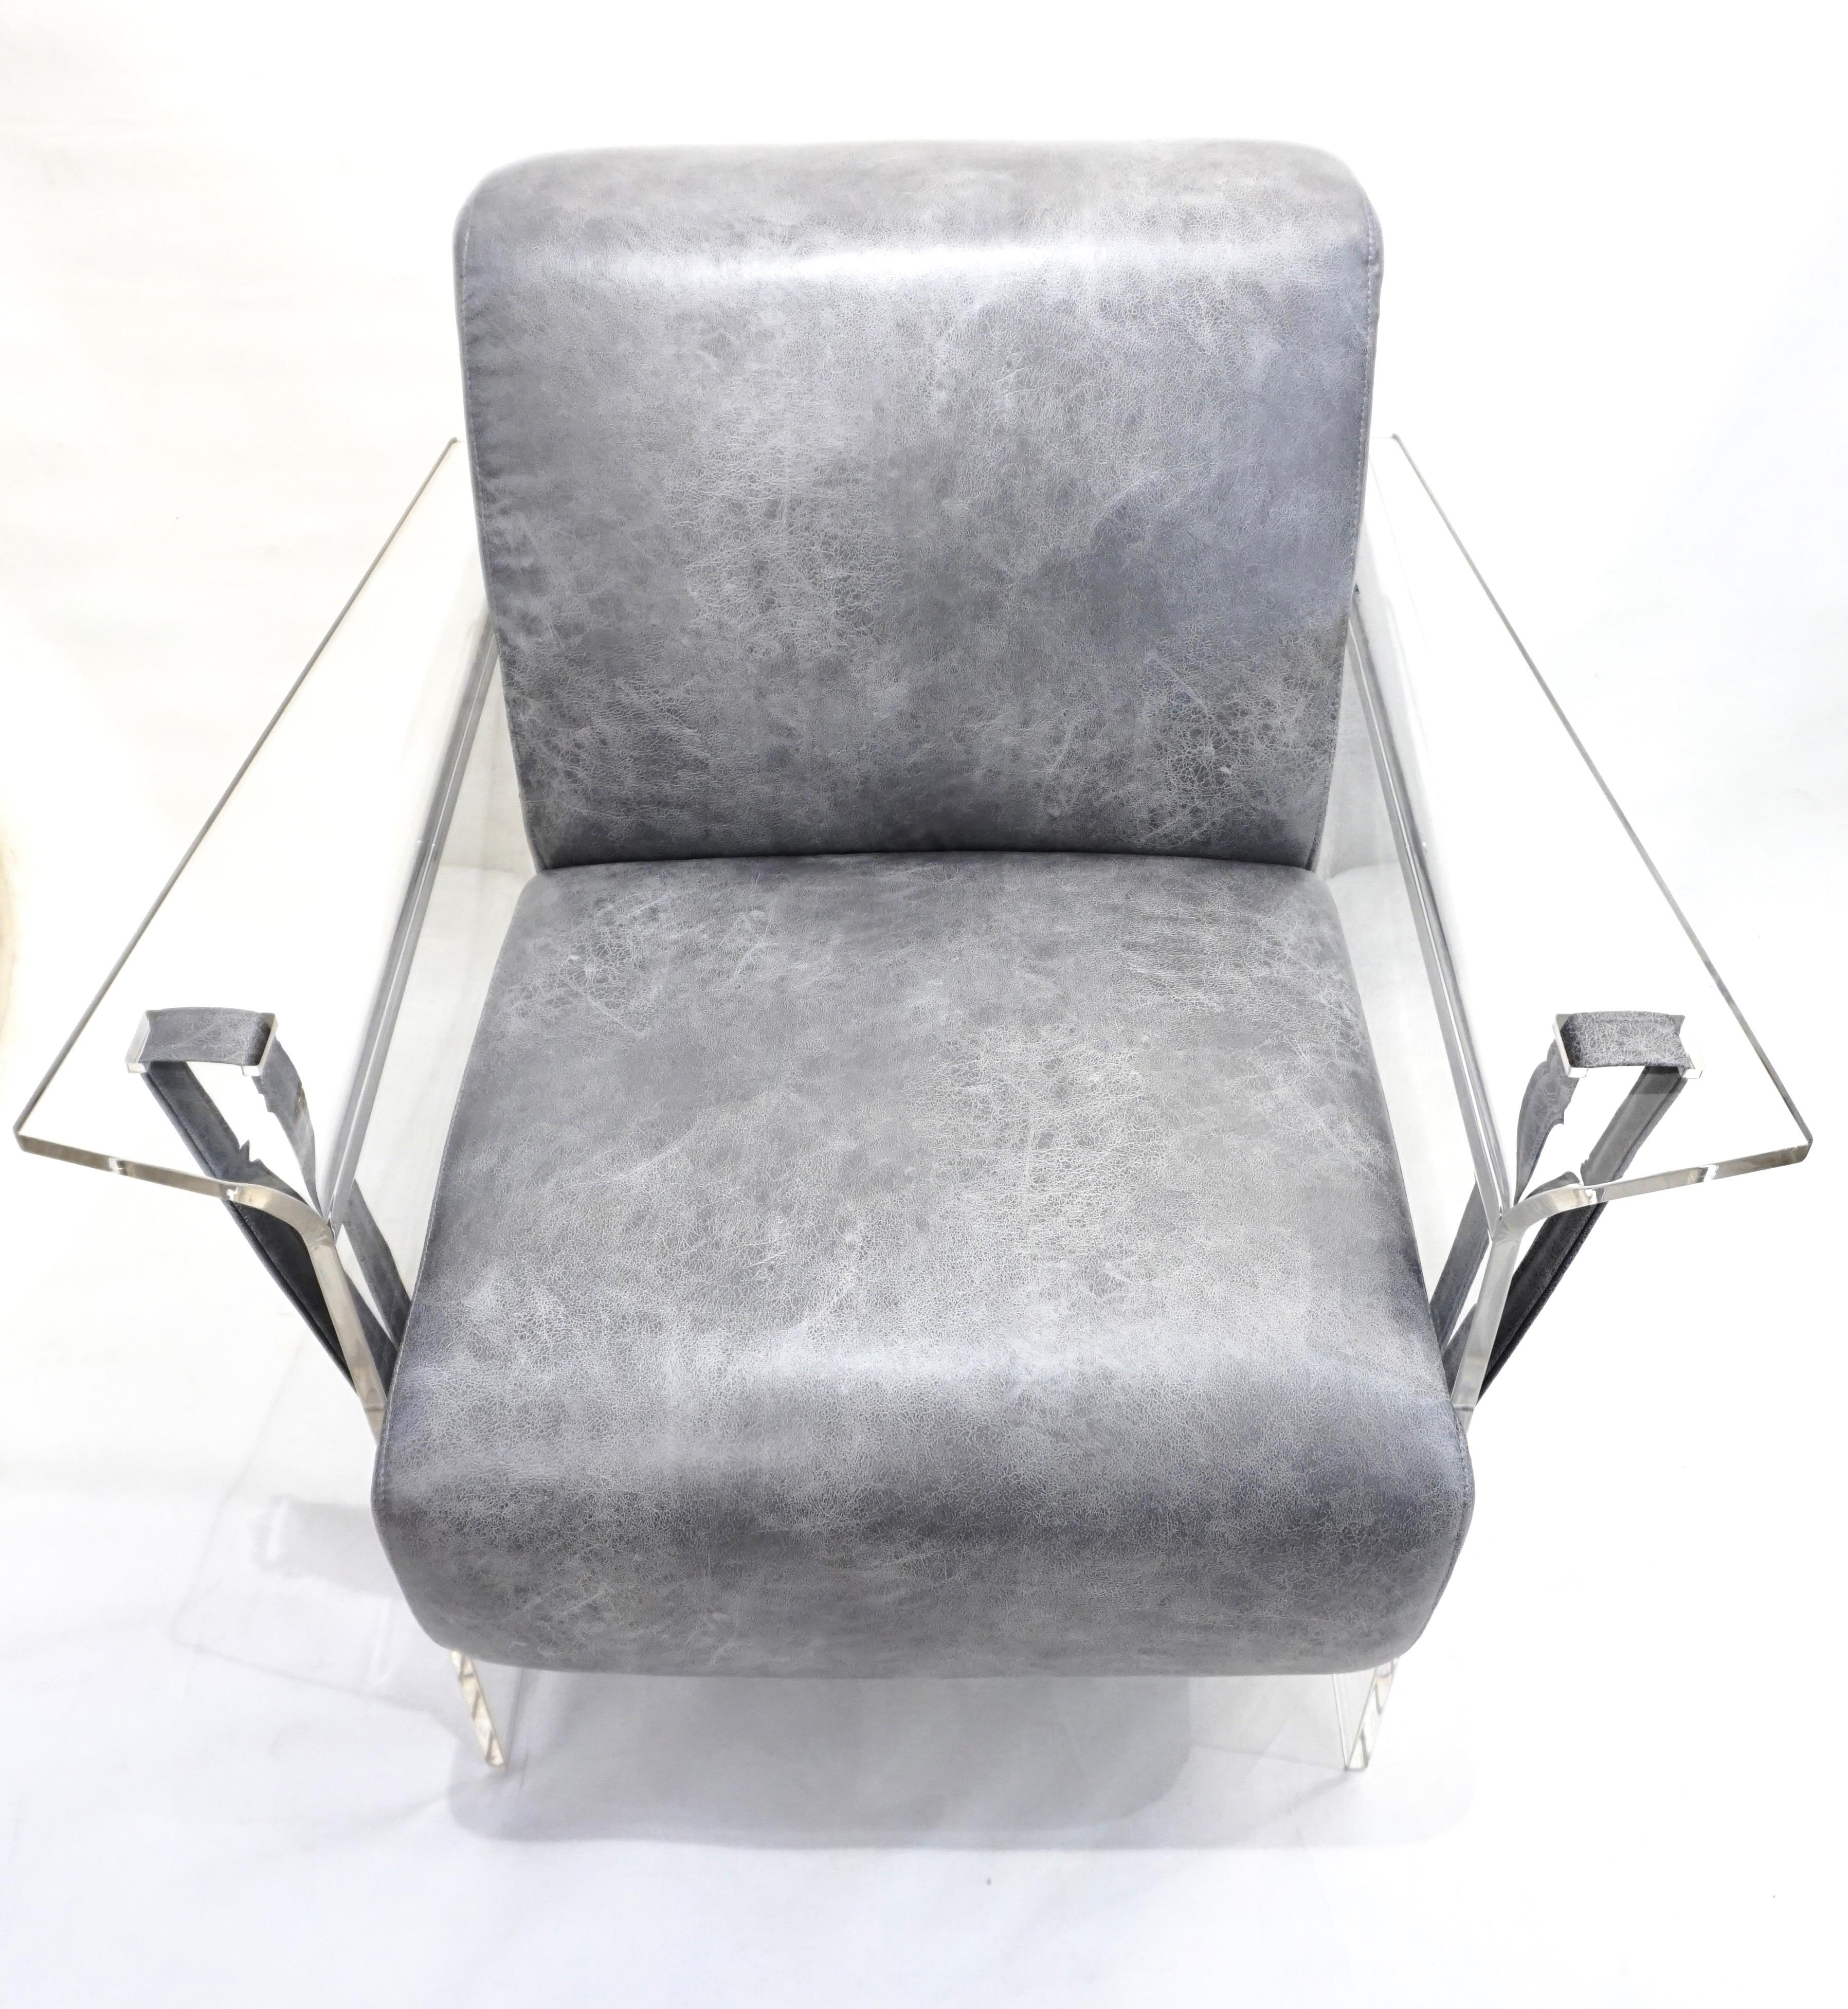 Bespoke Modernist Lucite Acrylic Lounge Armchair in Light Gray Faux Leather 2